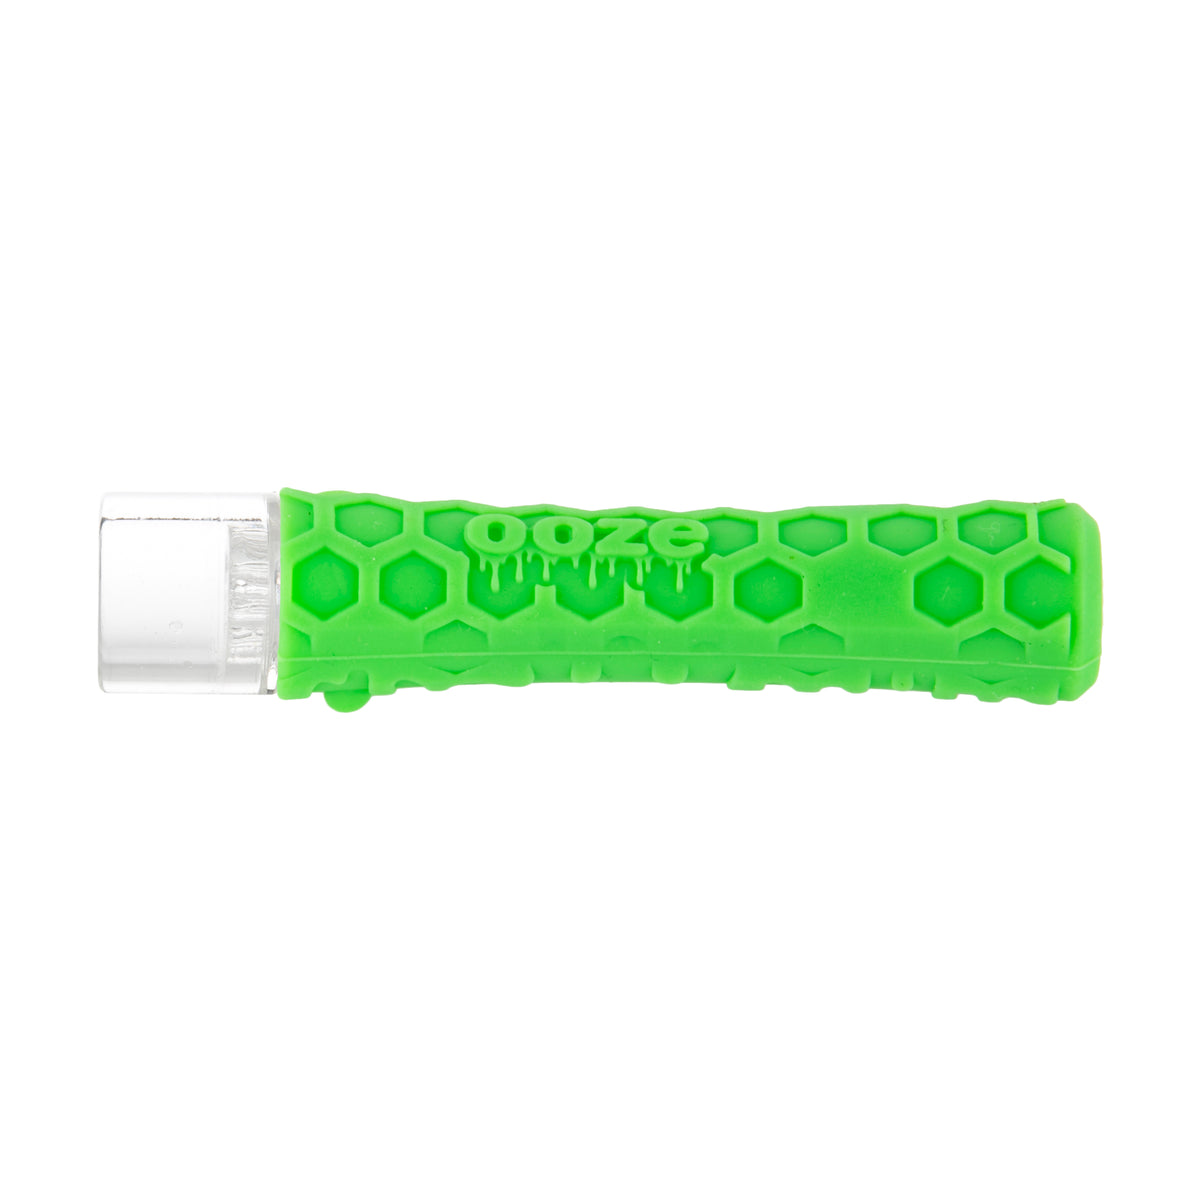 Ooze Hyborg Silicone Glass 4-in-1 Hybrid Water Pipe and Dab Straw – Green  Glow